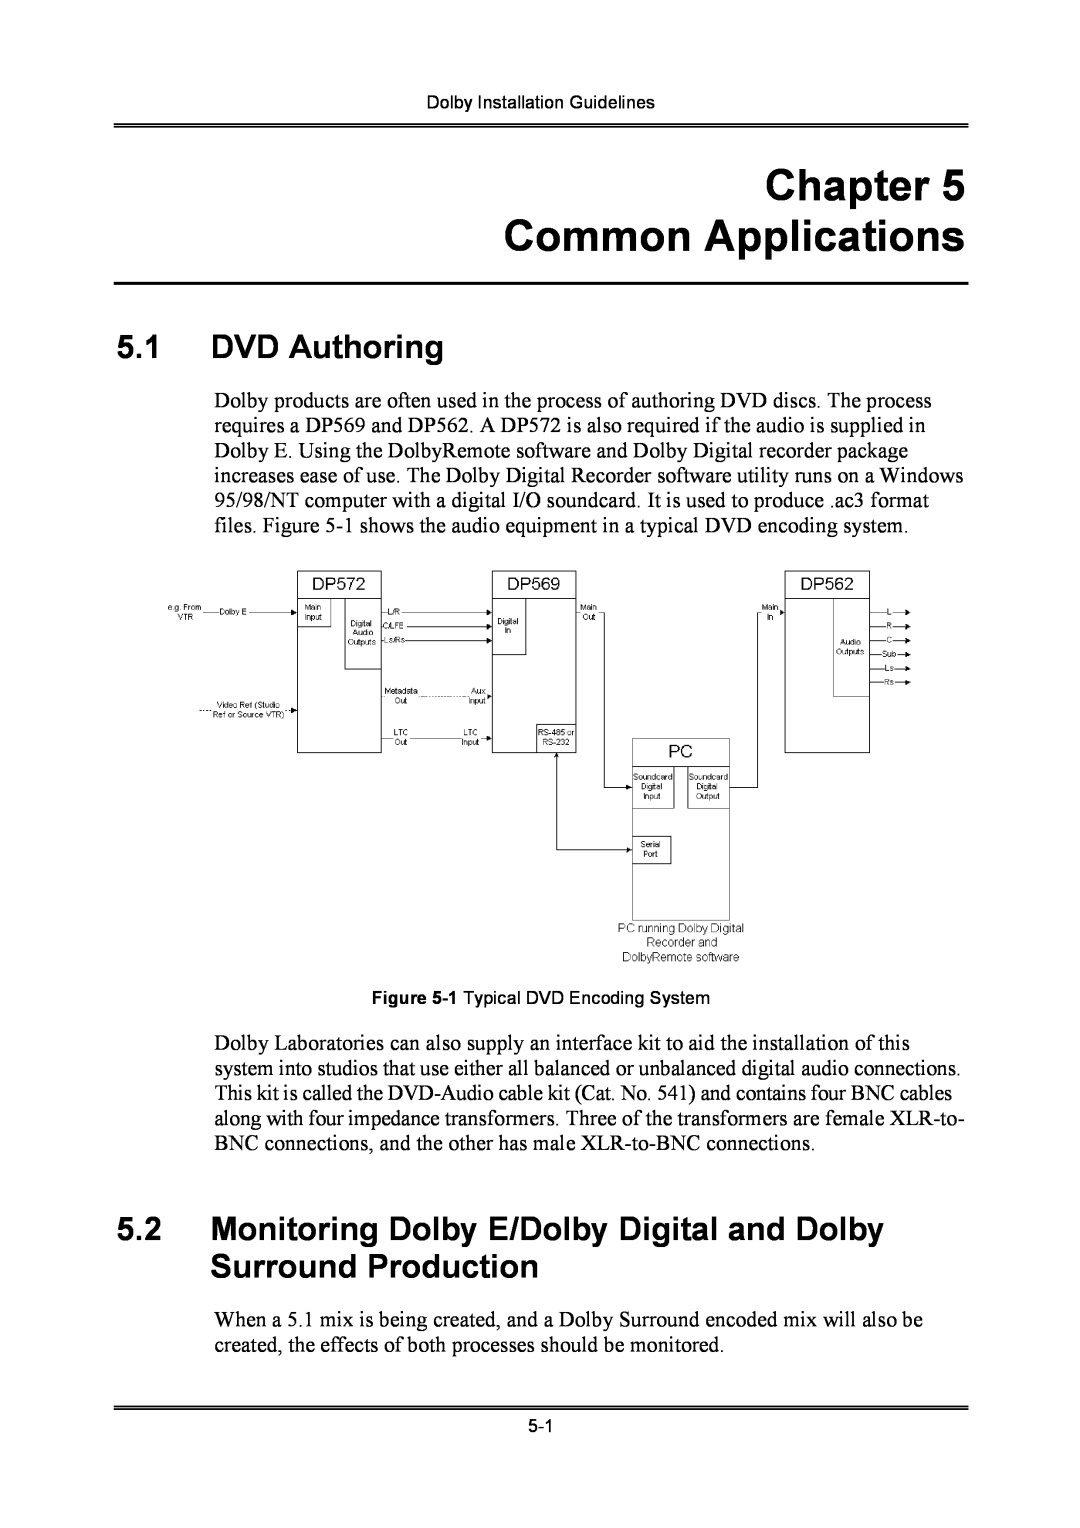 Dolby Laboratories S01/13621 manual Chapter Common Applications, 5.1DVD Authoring 